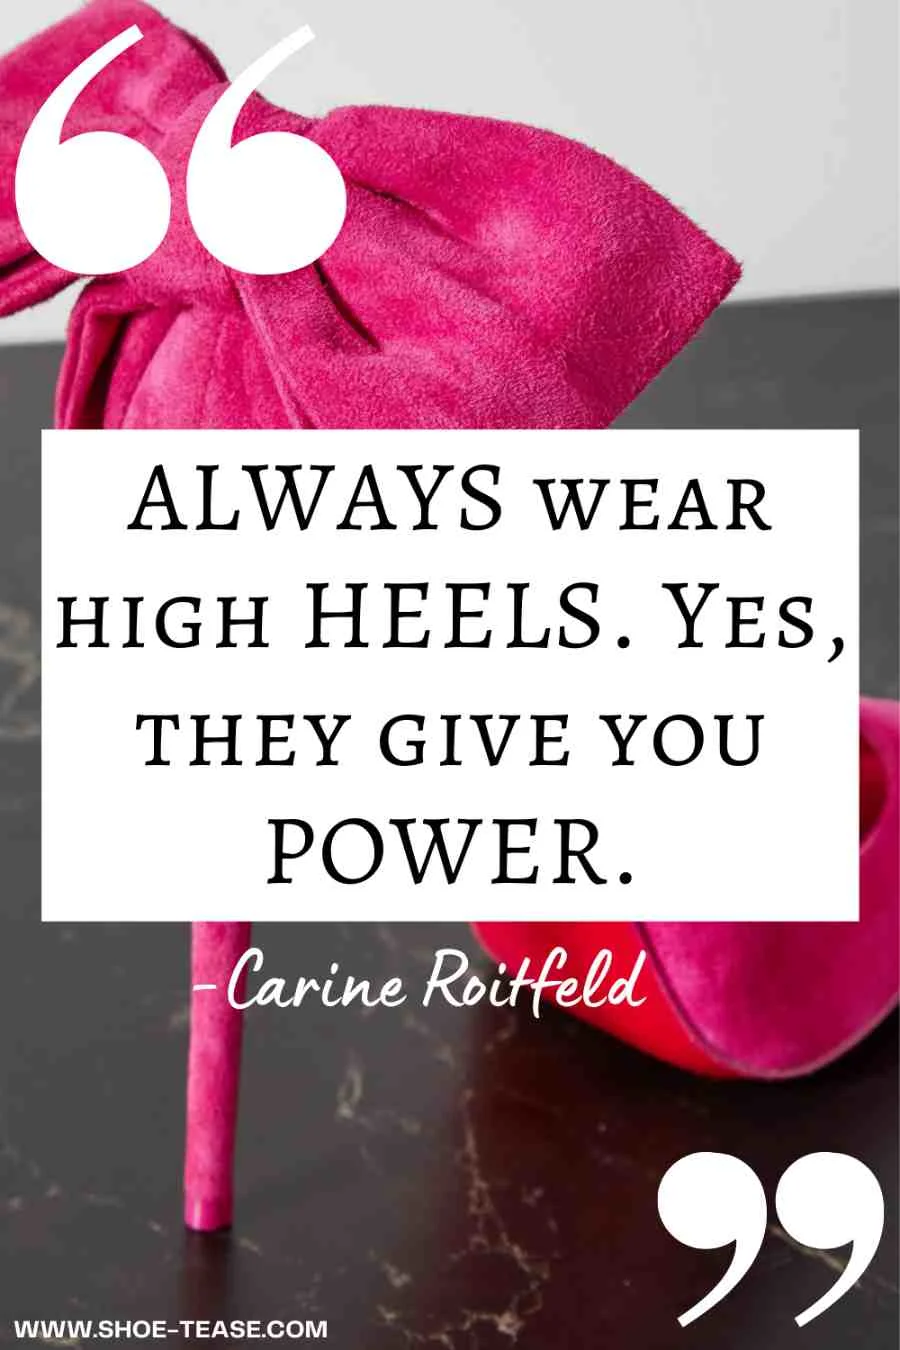 High Heels Quote text "Always wear high heels, yes they give you power. Carine Roitfeld" on top of image with hot pink high heels stiletto with red soles.